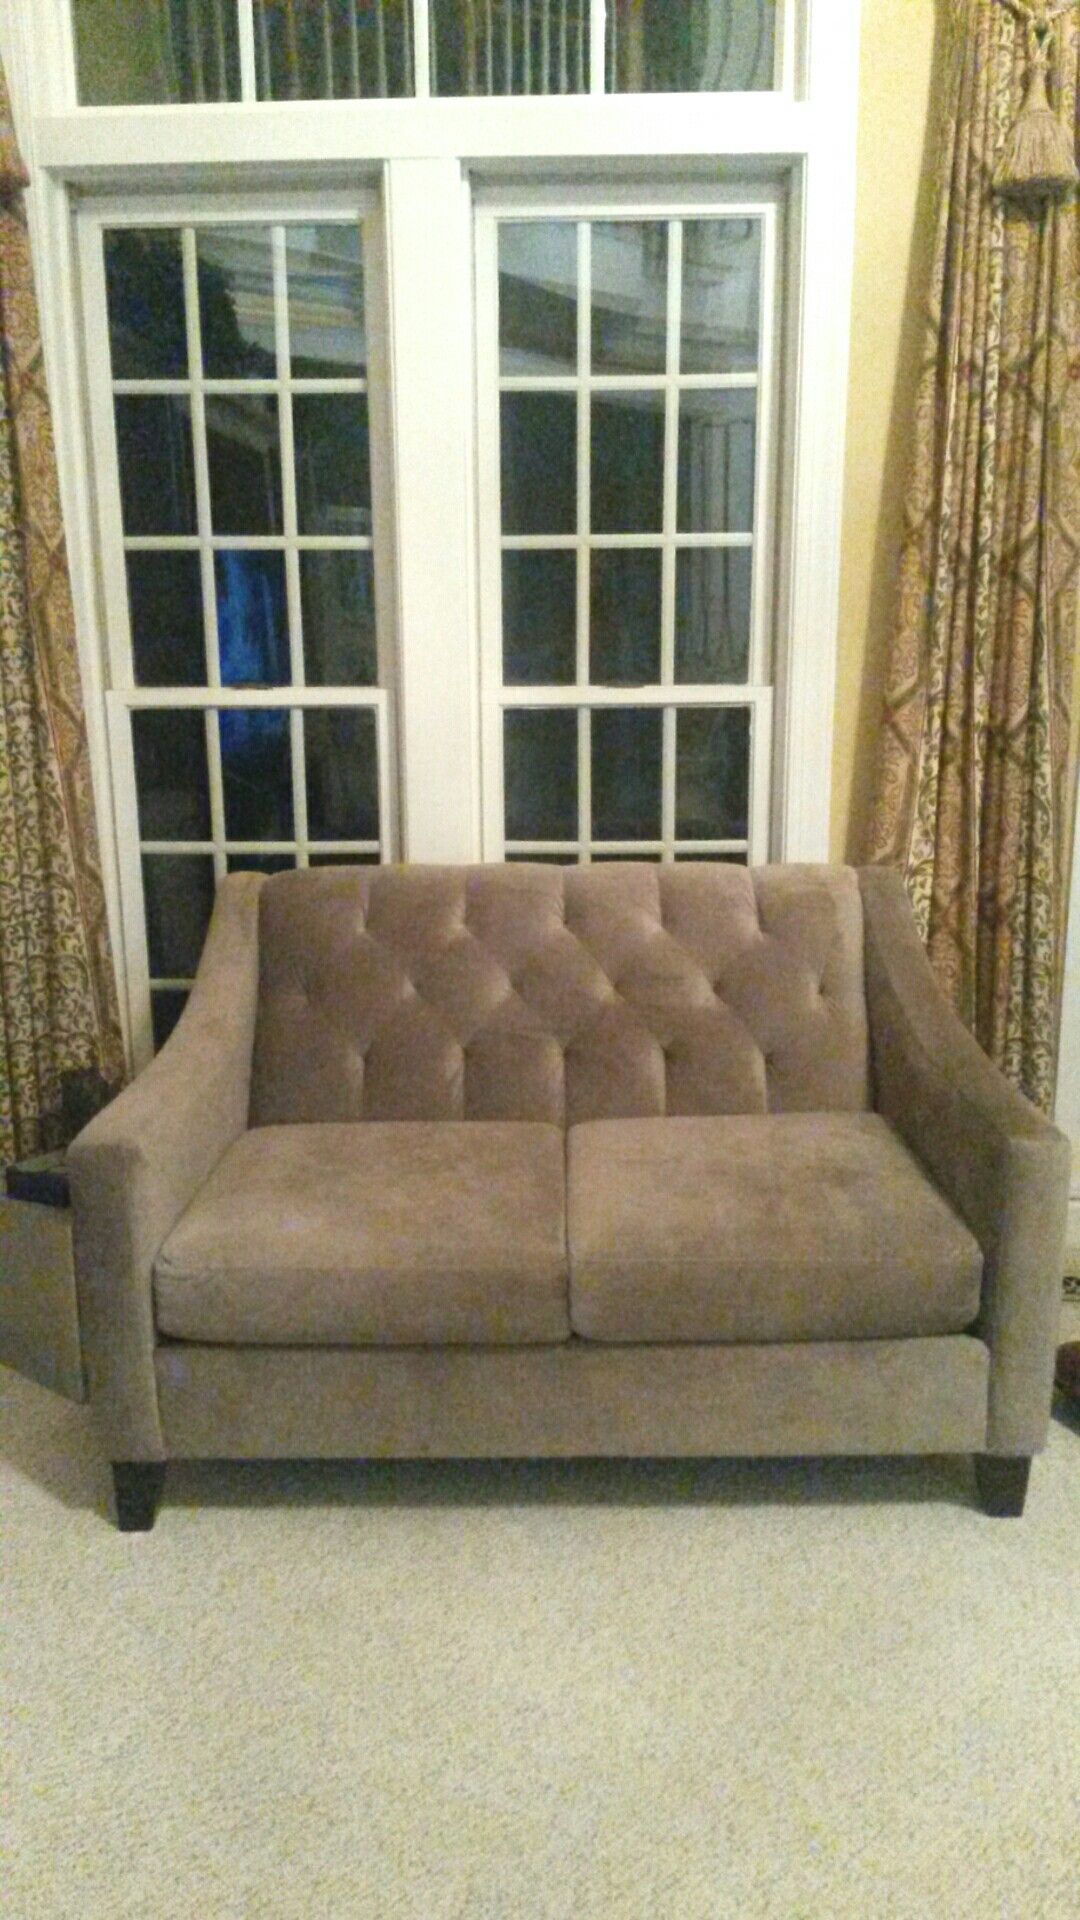 New beautiful solid grey couch